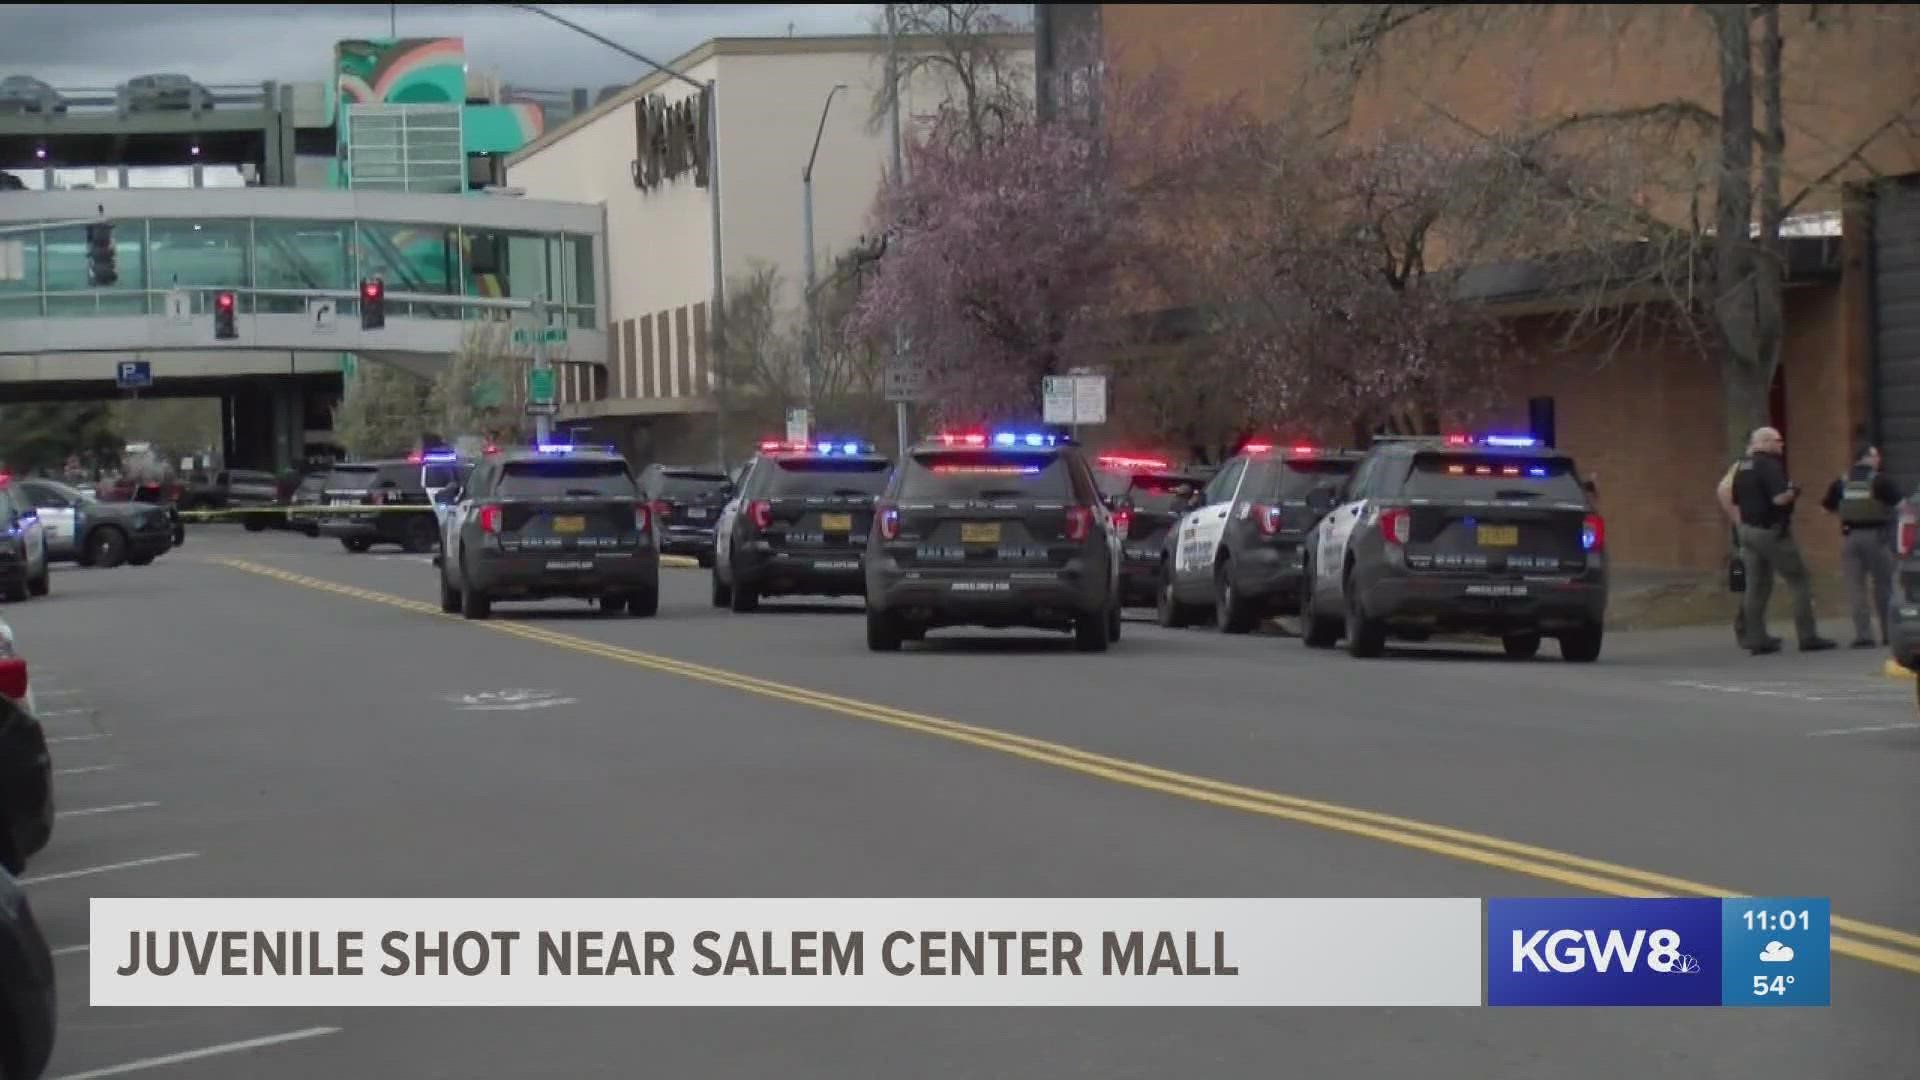 Police do not have a suspect in custody. There is still an active investigation in the area near Salem Center mall and people should avoid the area.